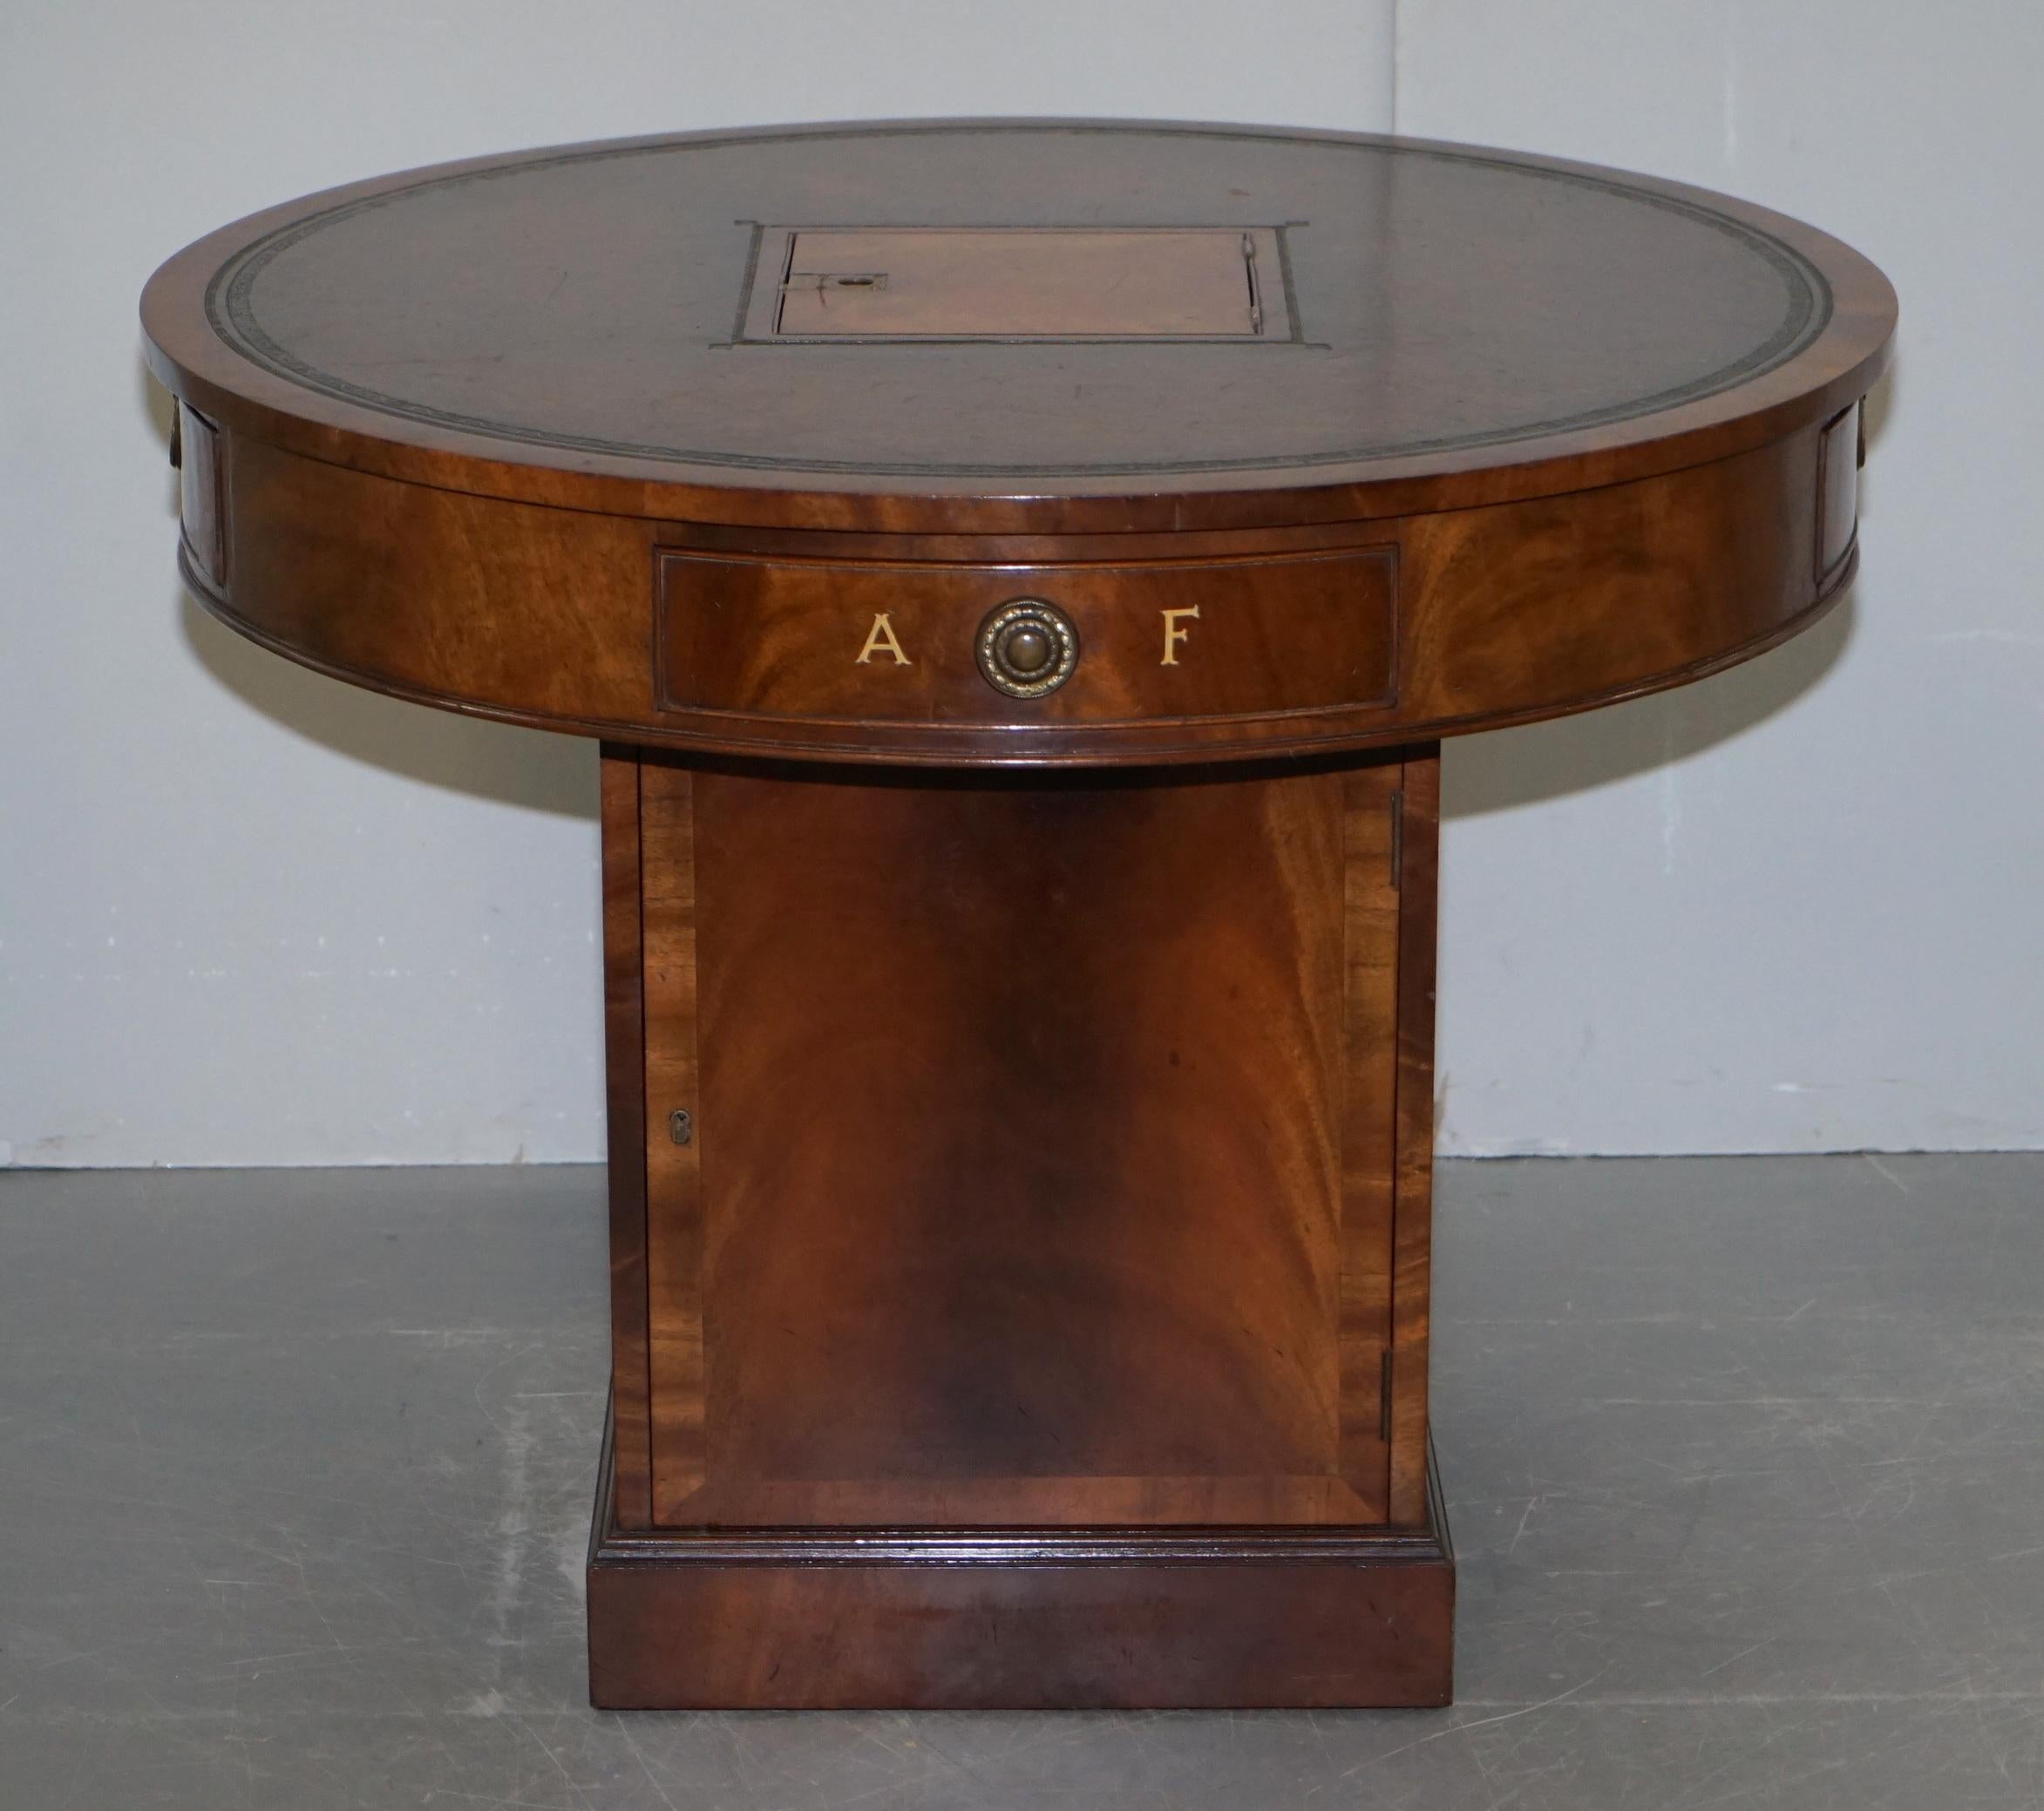 We are delighted to offer for sale this exquisite Victorian circa 1880 revolving flamed mahogany with hand dyed brown leather top “Rent” table

This is a very fine piece of antique furniture indeed. The originals date back to the late 18th century